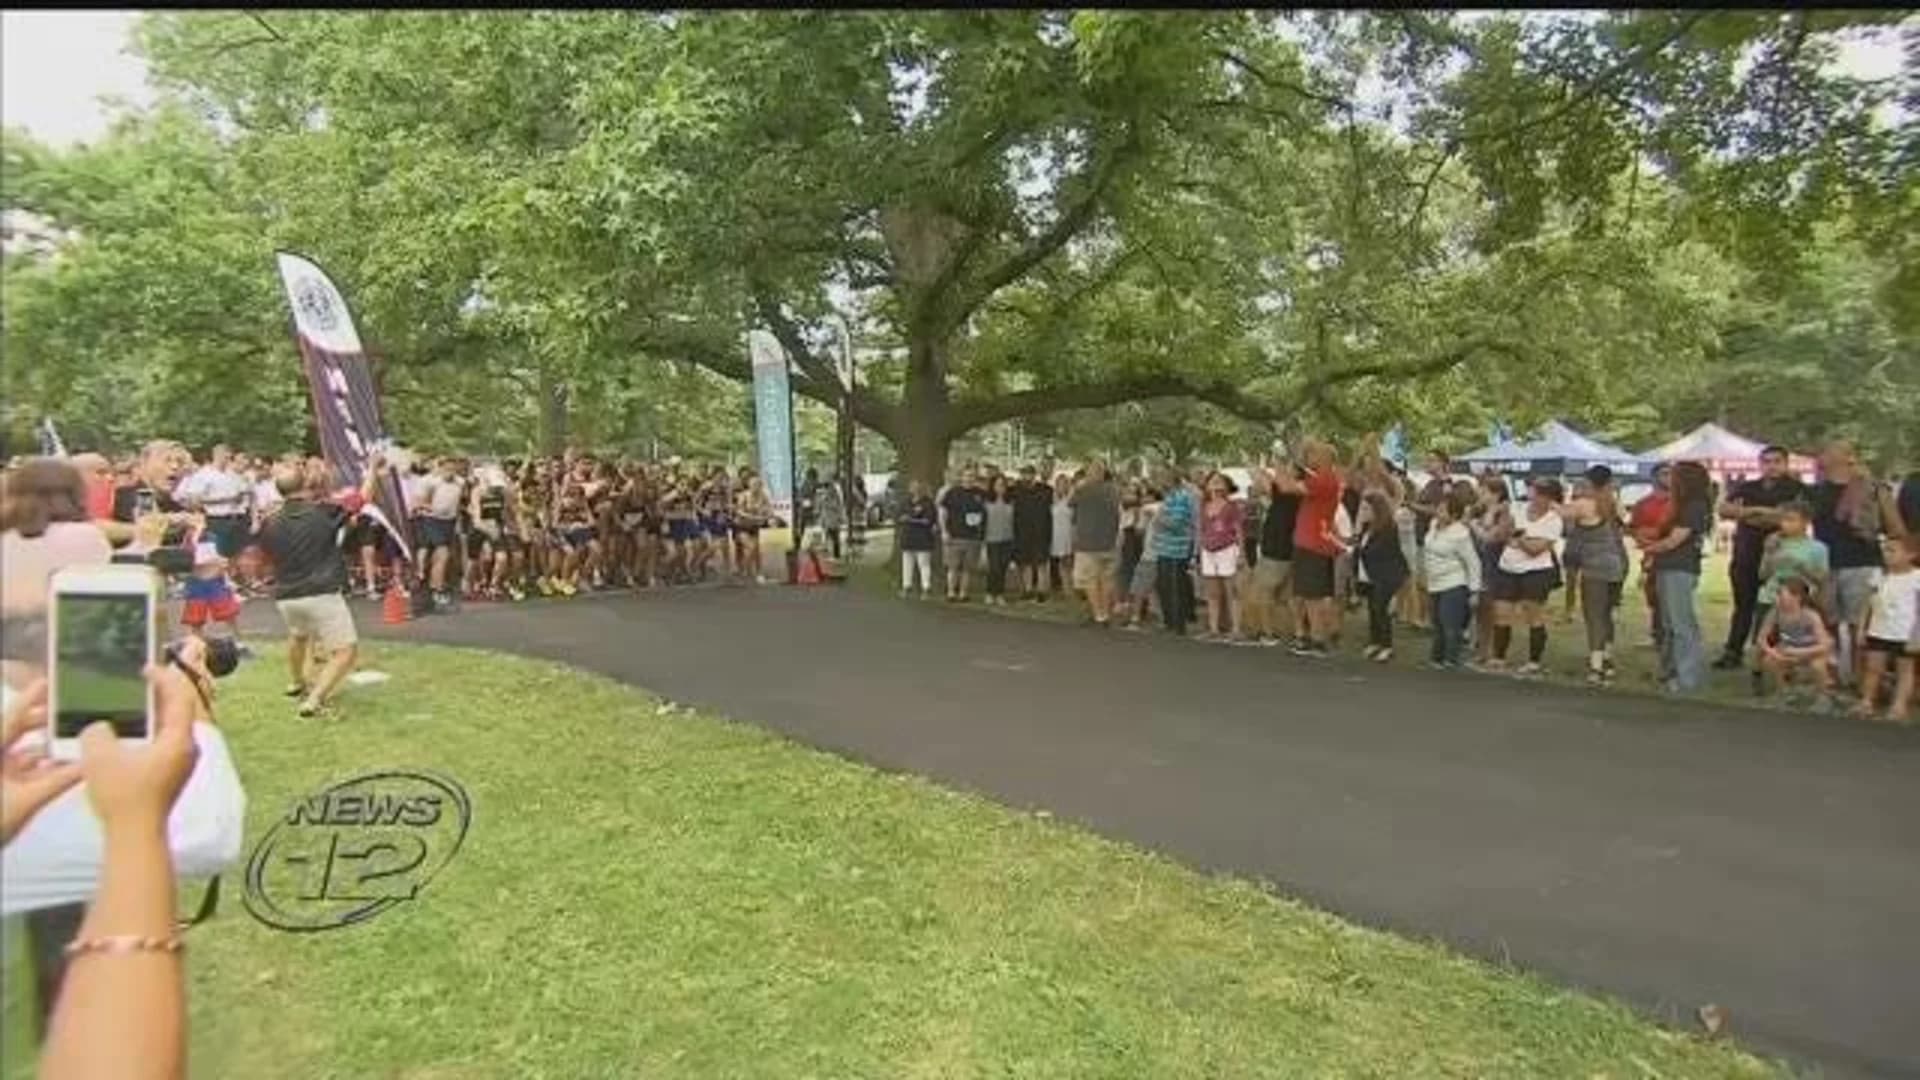 Hundreds turn out for Nassau PD's annual 5K run